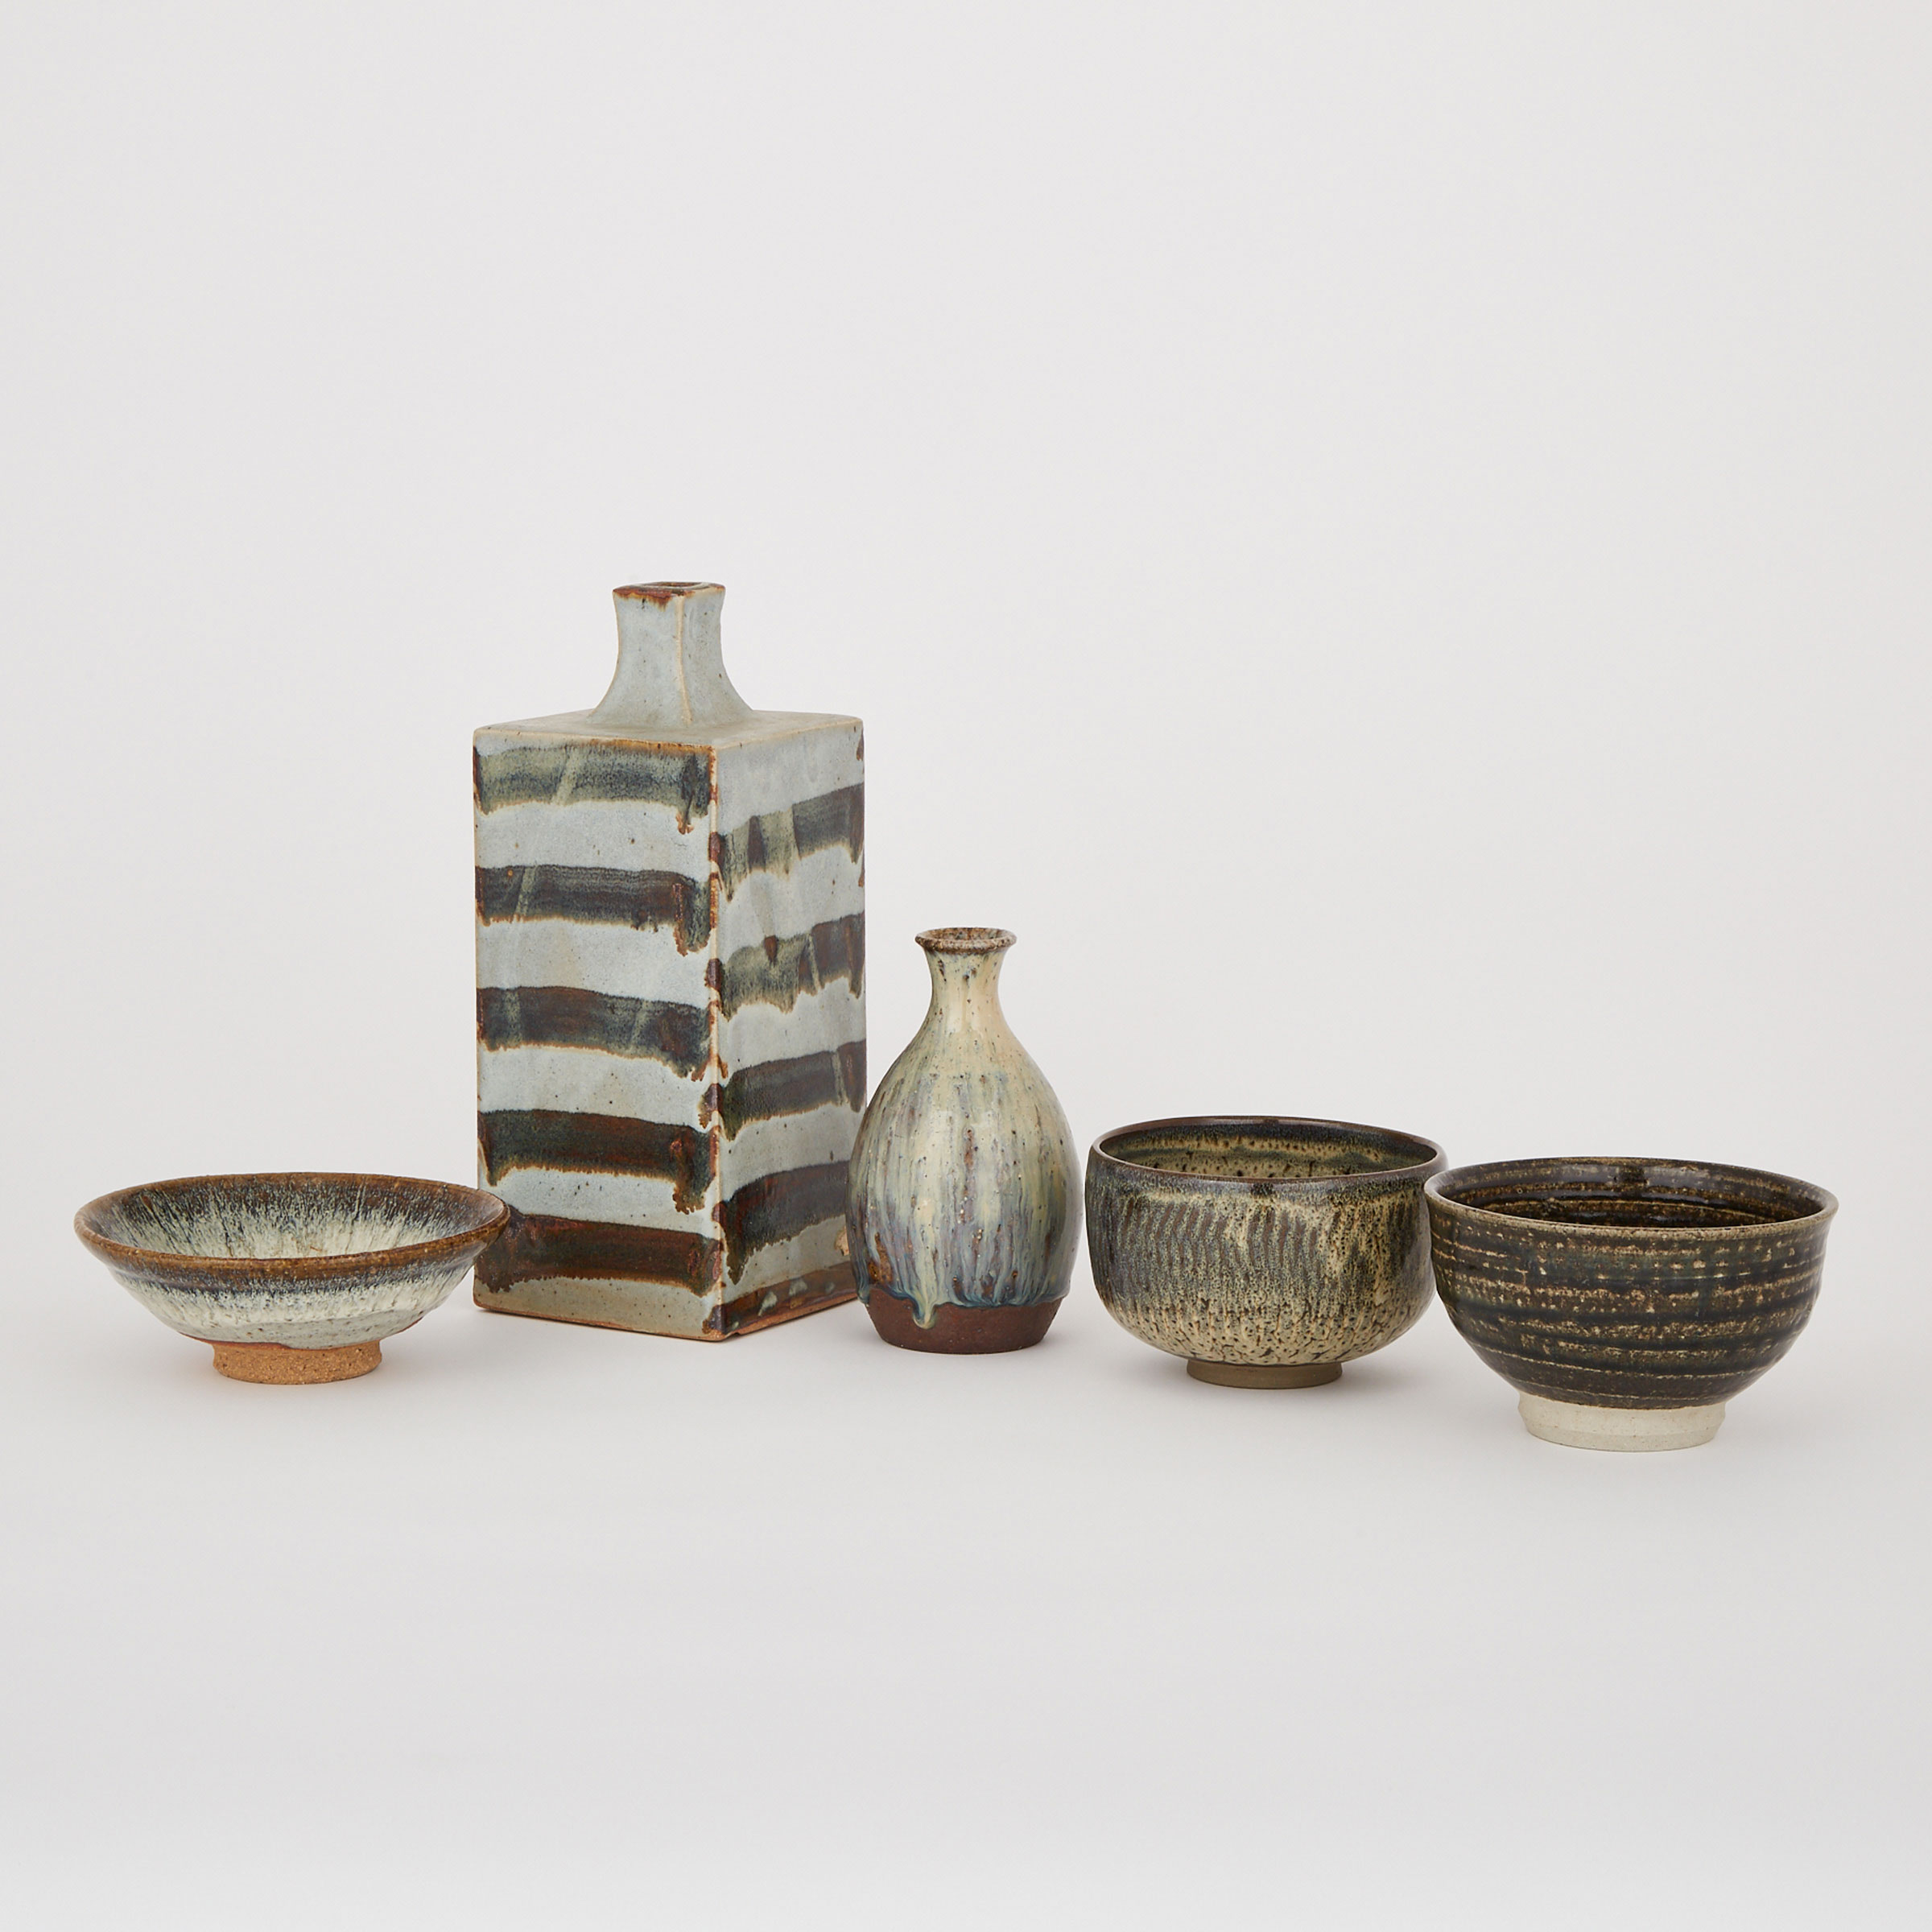 A Group of Five Japanese Glazed Wares, Early to Mid-20th Century 